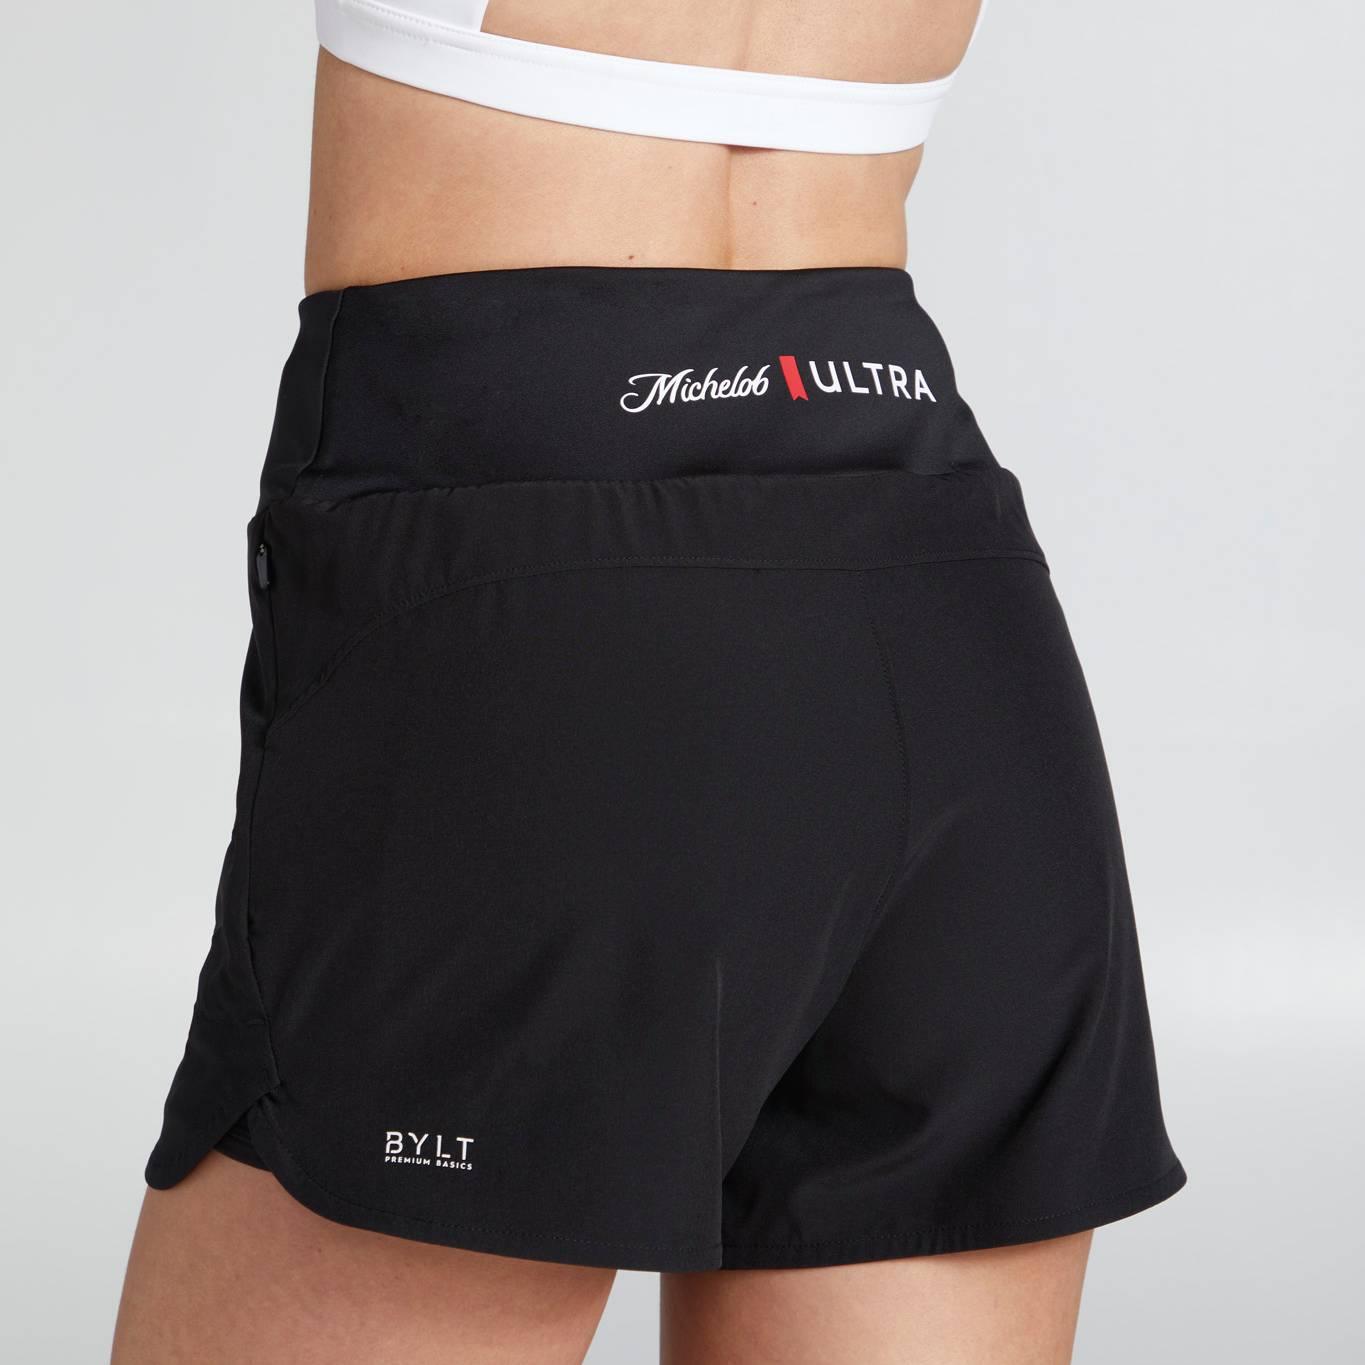 back view of womens flow shorts with BYLT logo on the bottom back left thigh and Michelob ULTRA logo on back center waistband